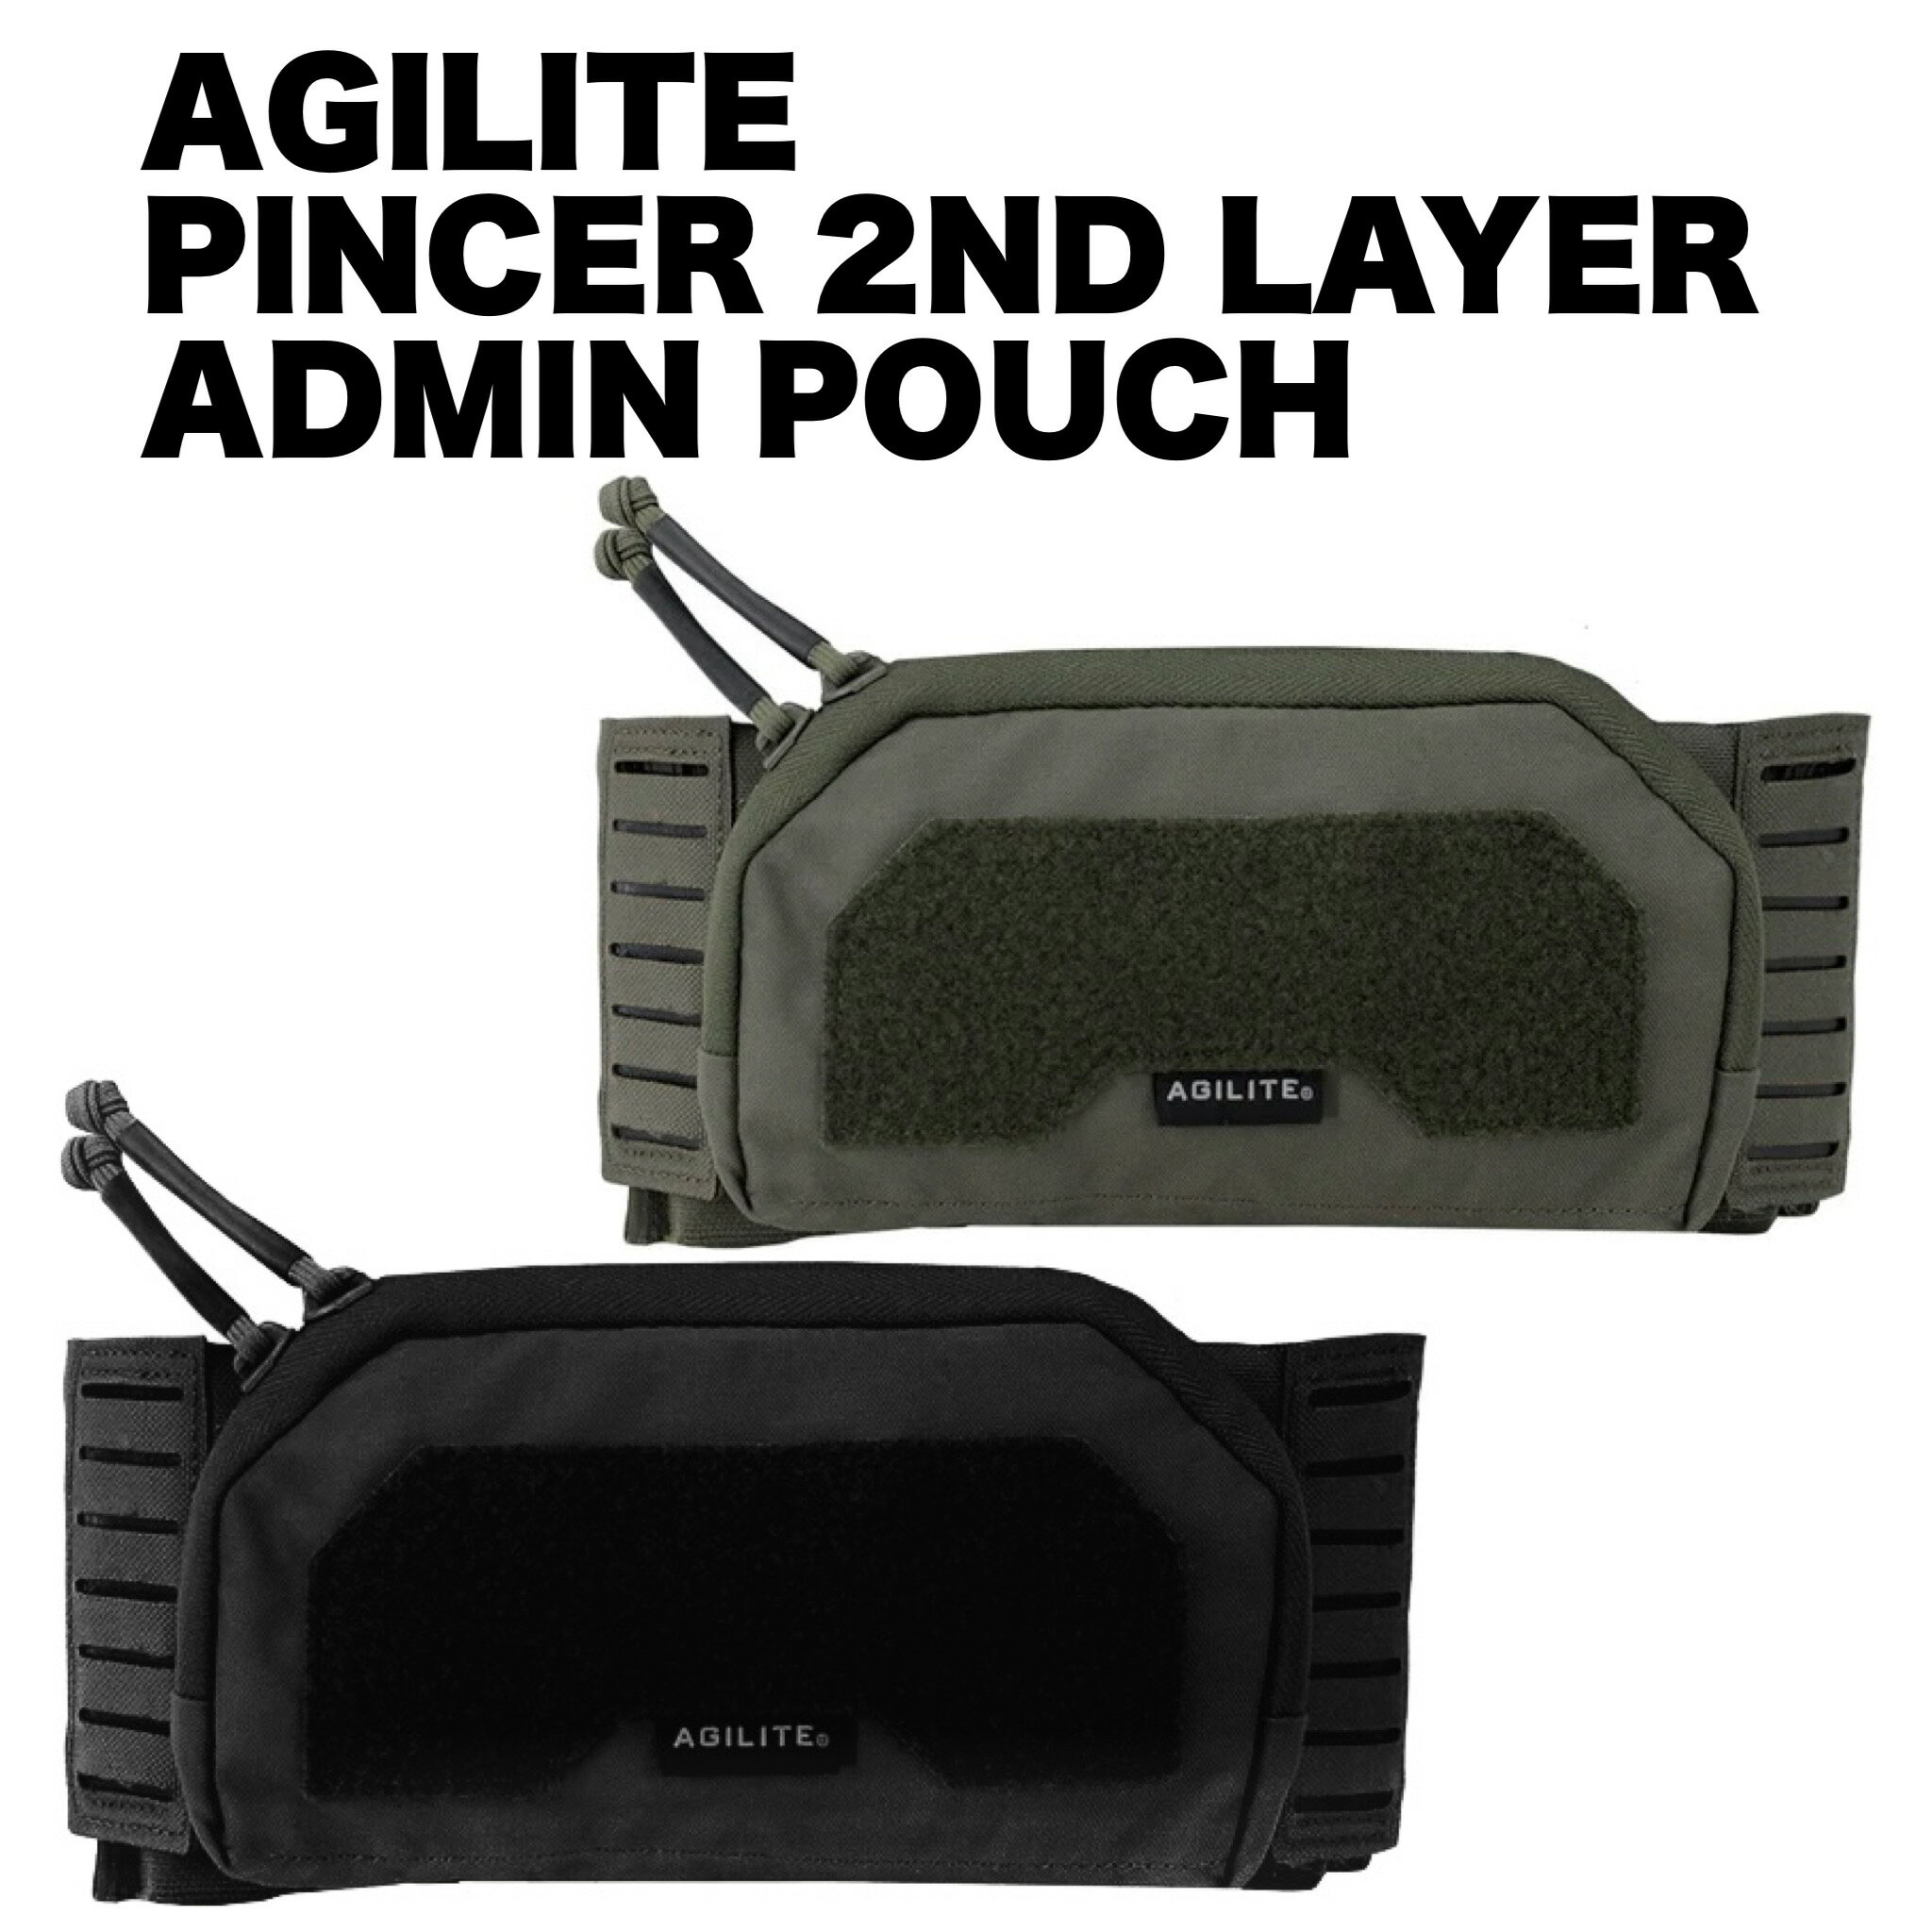 AGILITE PINCER 2ND LAYER ADMIN POUCH